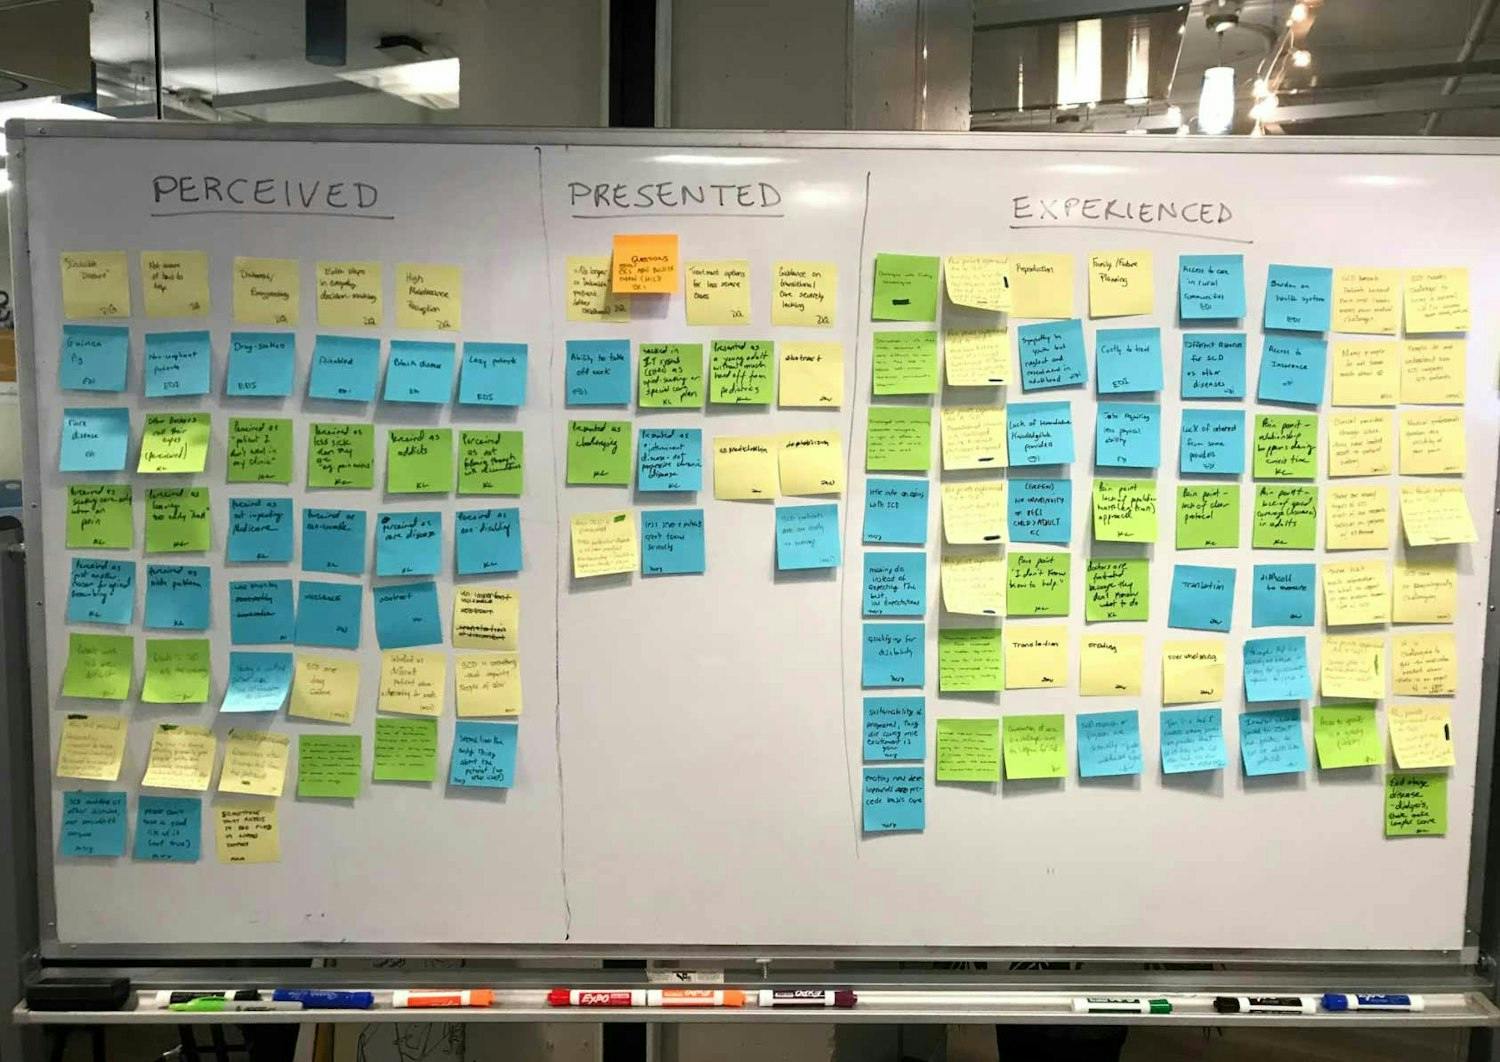 White board from a work session, covered in post it notes with ideas sorted into categories perceived, presented, and experienced.